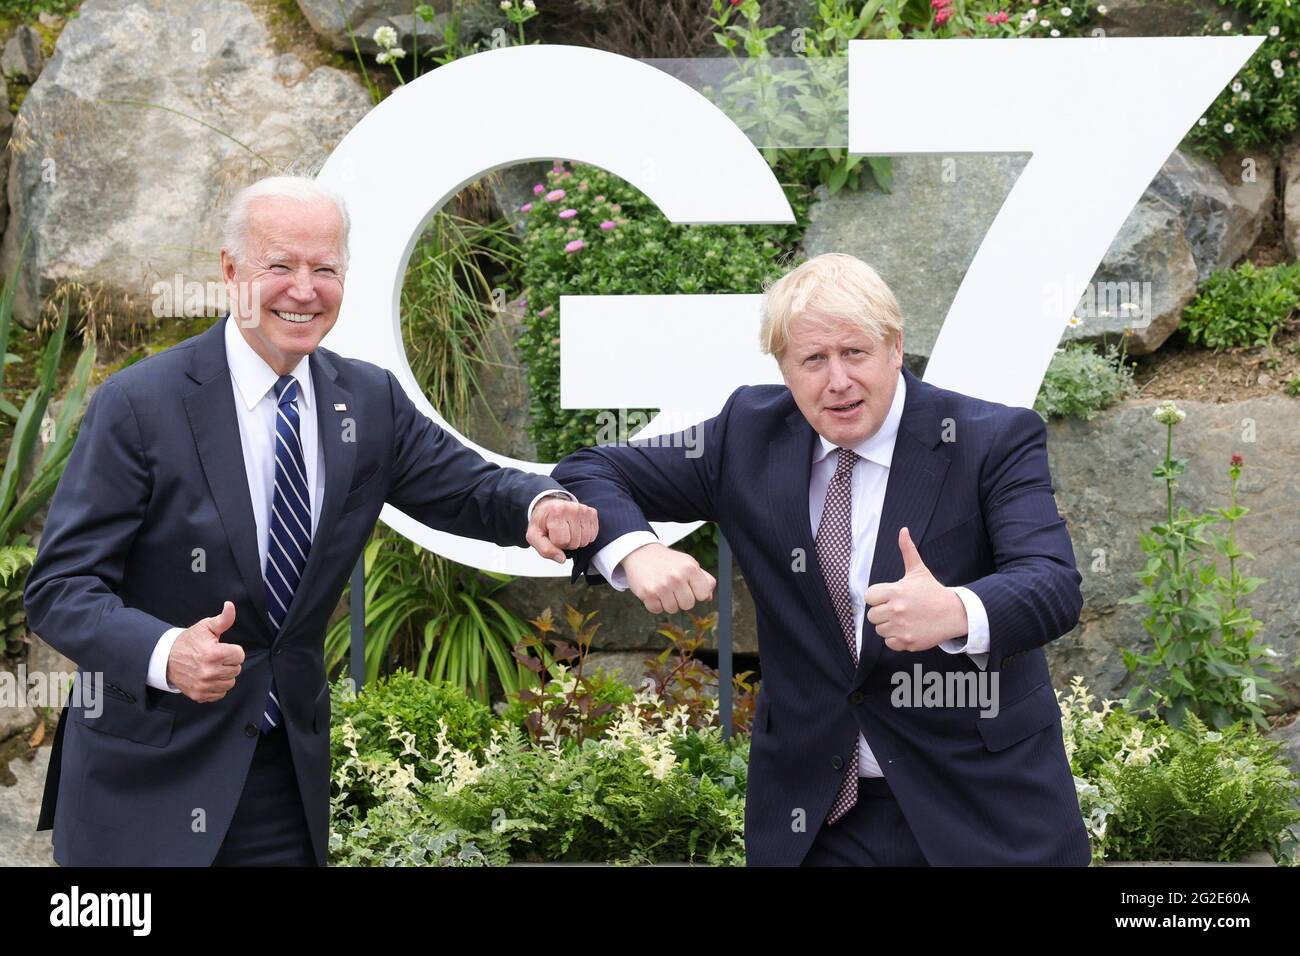 (210610) -- FALMOUTH (BRITAIN), June 10, 2021 (Xinhua) -- British Prime Minister Boris Johnson (R) poses with U.S. President Joe Biden in Carbis Bay, Cornwall, Britain, on June 10, 2021. Boris Johnson and Joe Biden on Thursday agreed to work to resume travel between the two countries and signed a new Atlantic Charter, as they met ahead of the Group of Seven (G7) summit. (Andrew Parsons/No 10 Downing Street/Handout via Xinhua) Credit: Xinhua/Alamy Live News Stock Photo